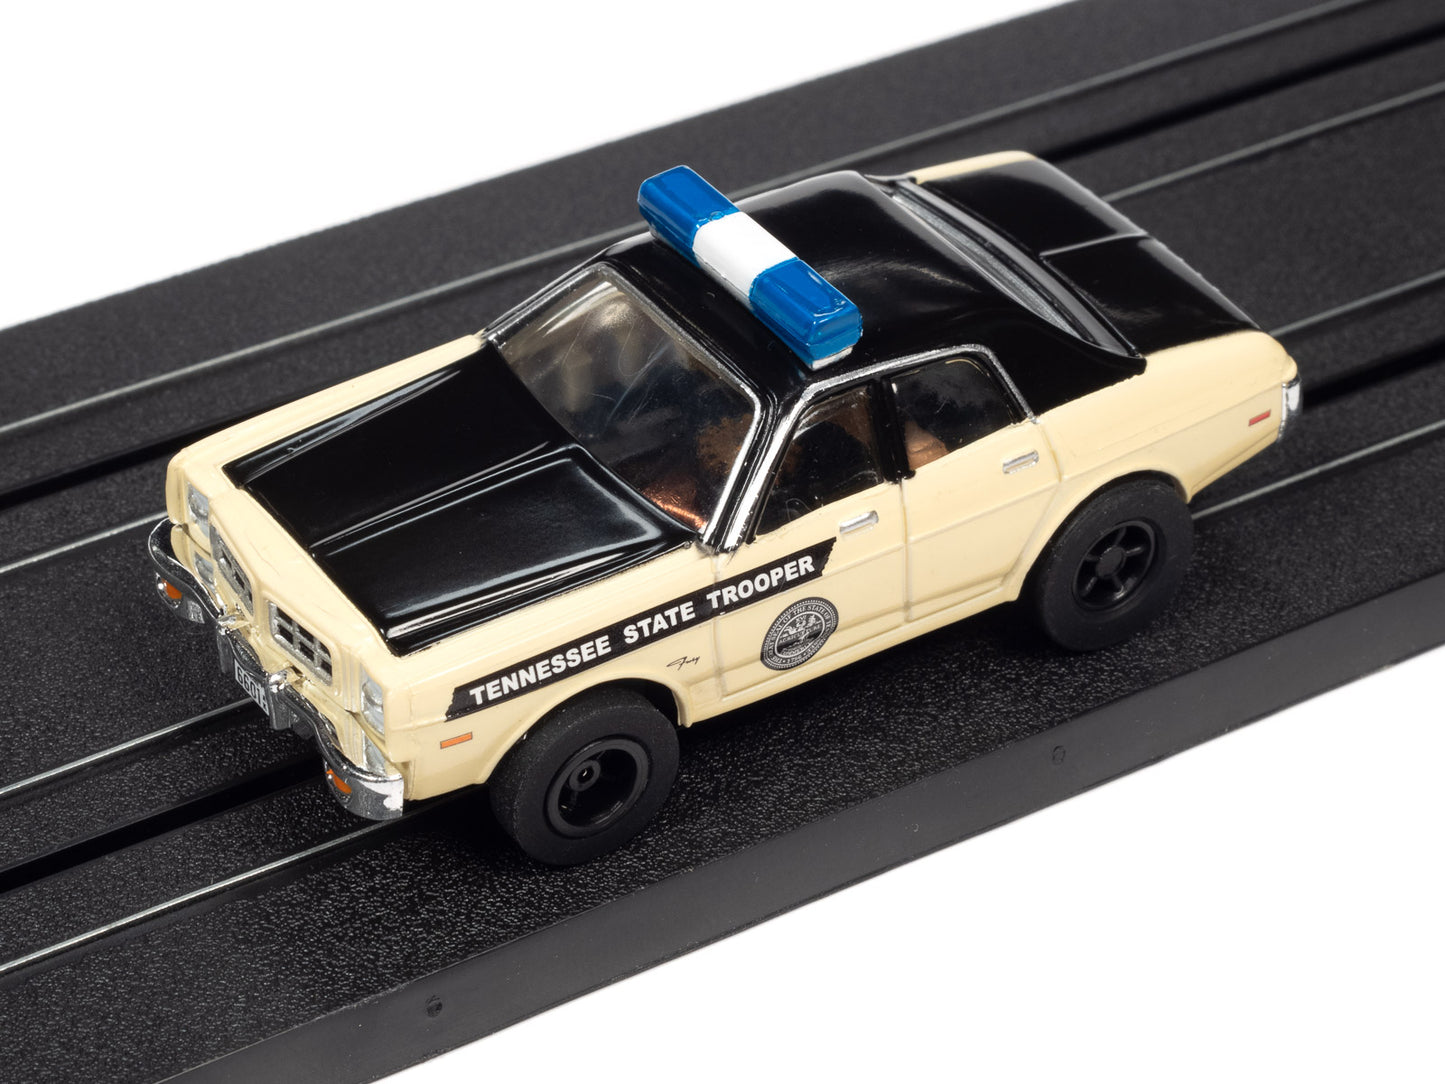 1978 Plymouth Fury Tennessee State Trooper, H.O. Scale Slot Car, Xtraction Chassis